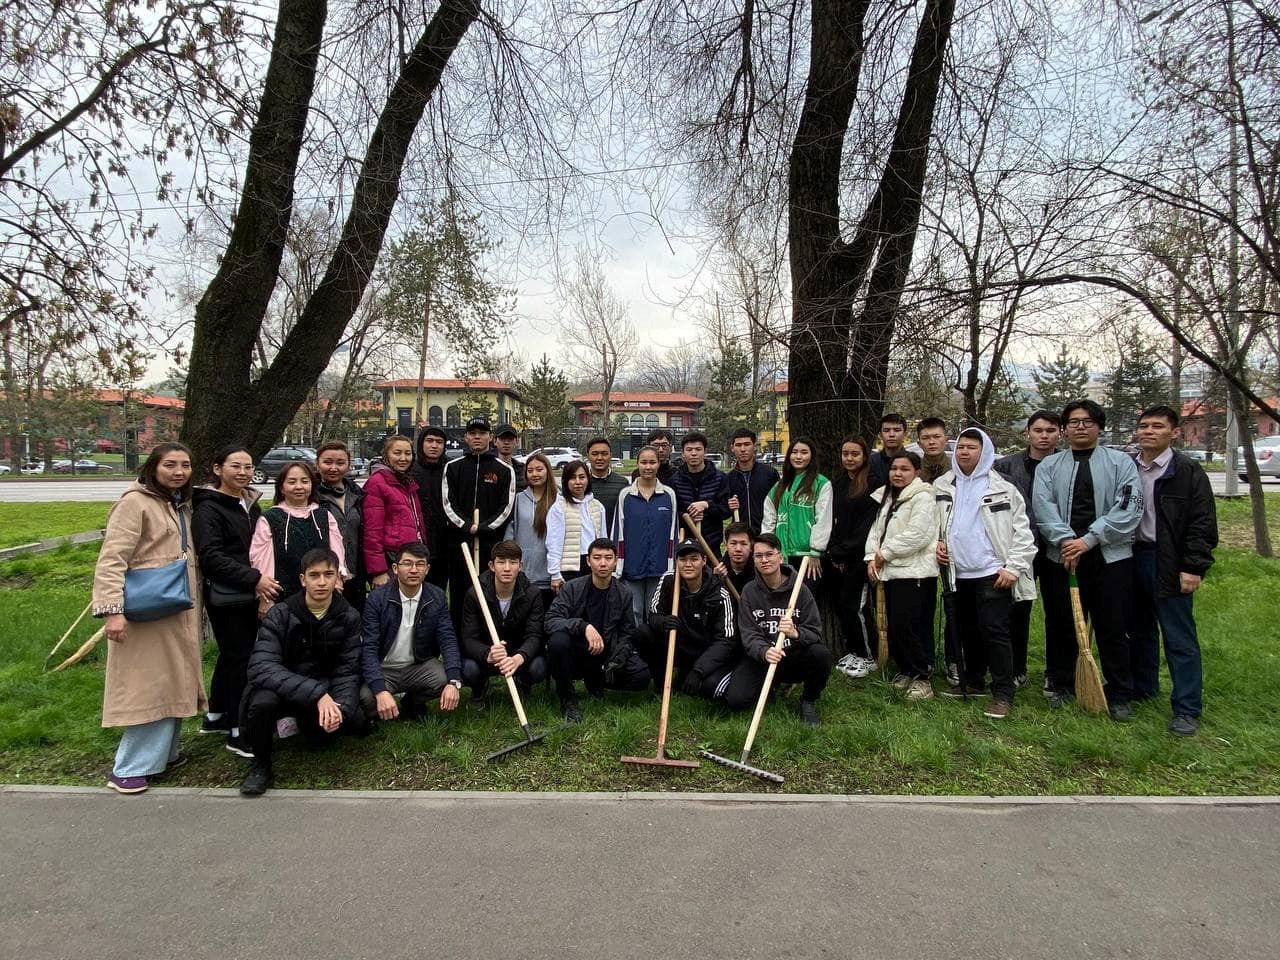 UNIVERSITY-WIDE CLEAN-UP DAY. Department of cartography and geoinformatics